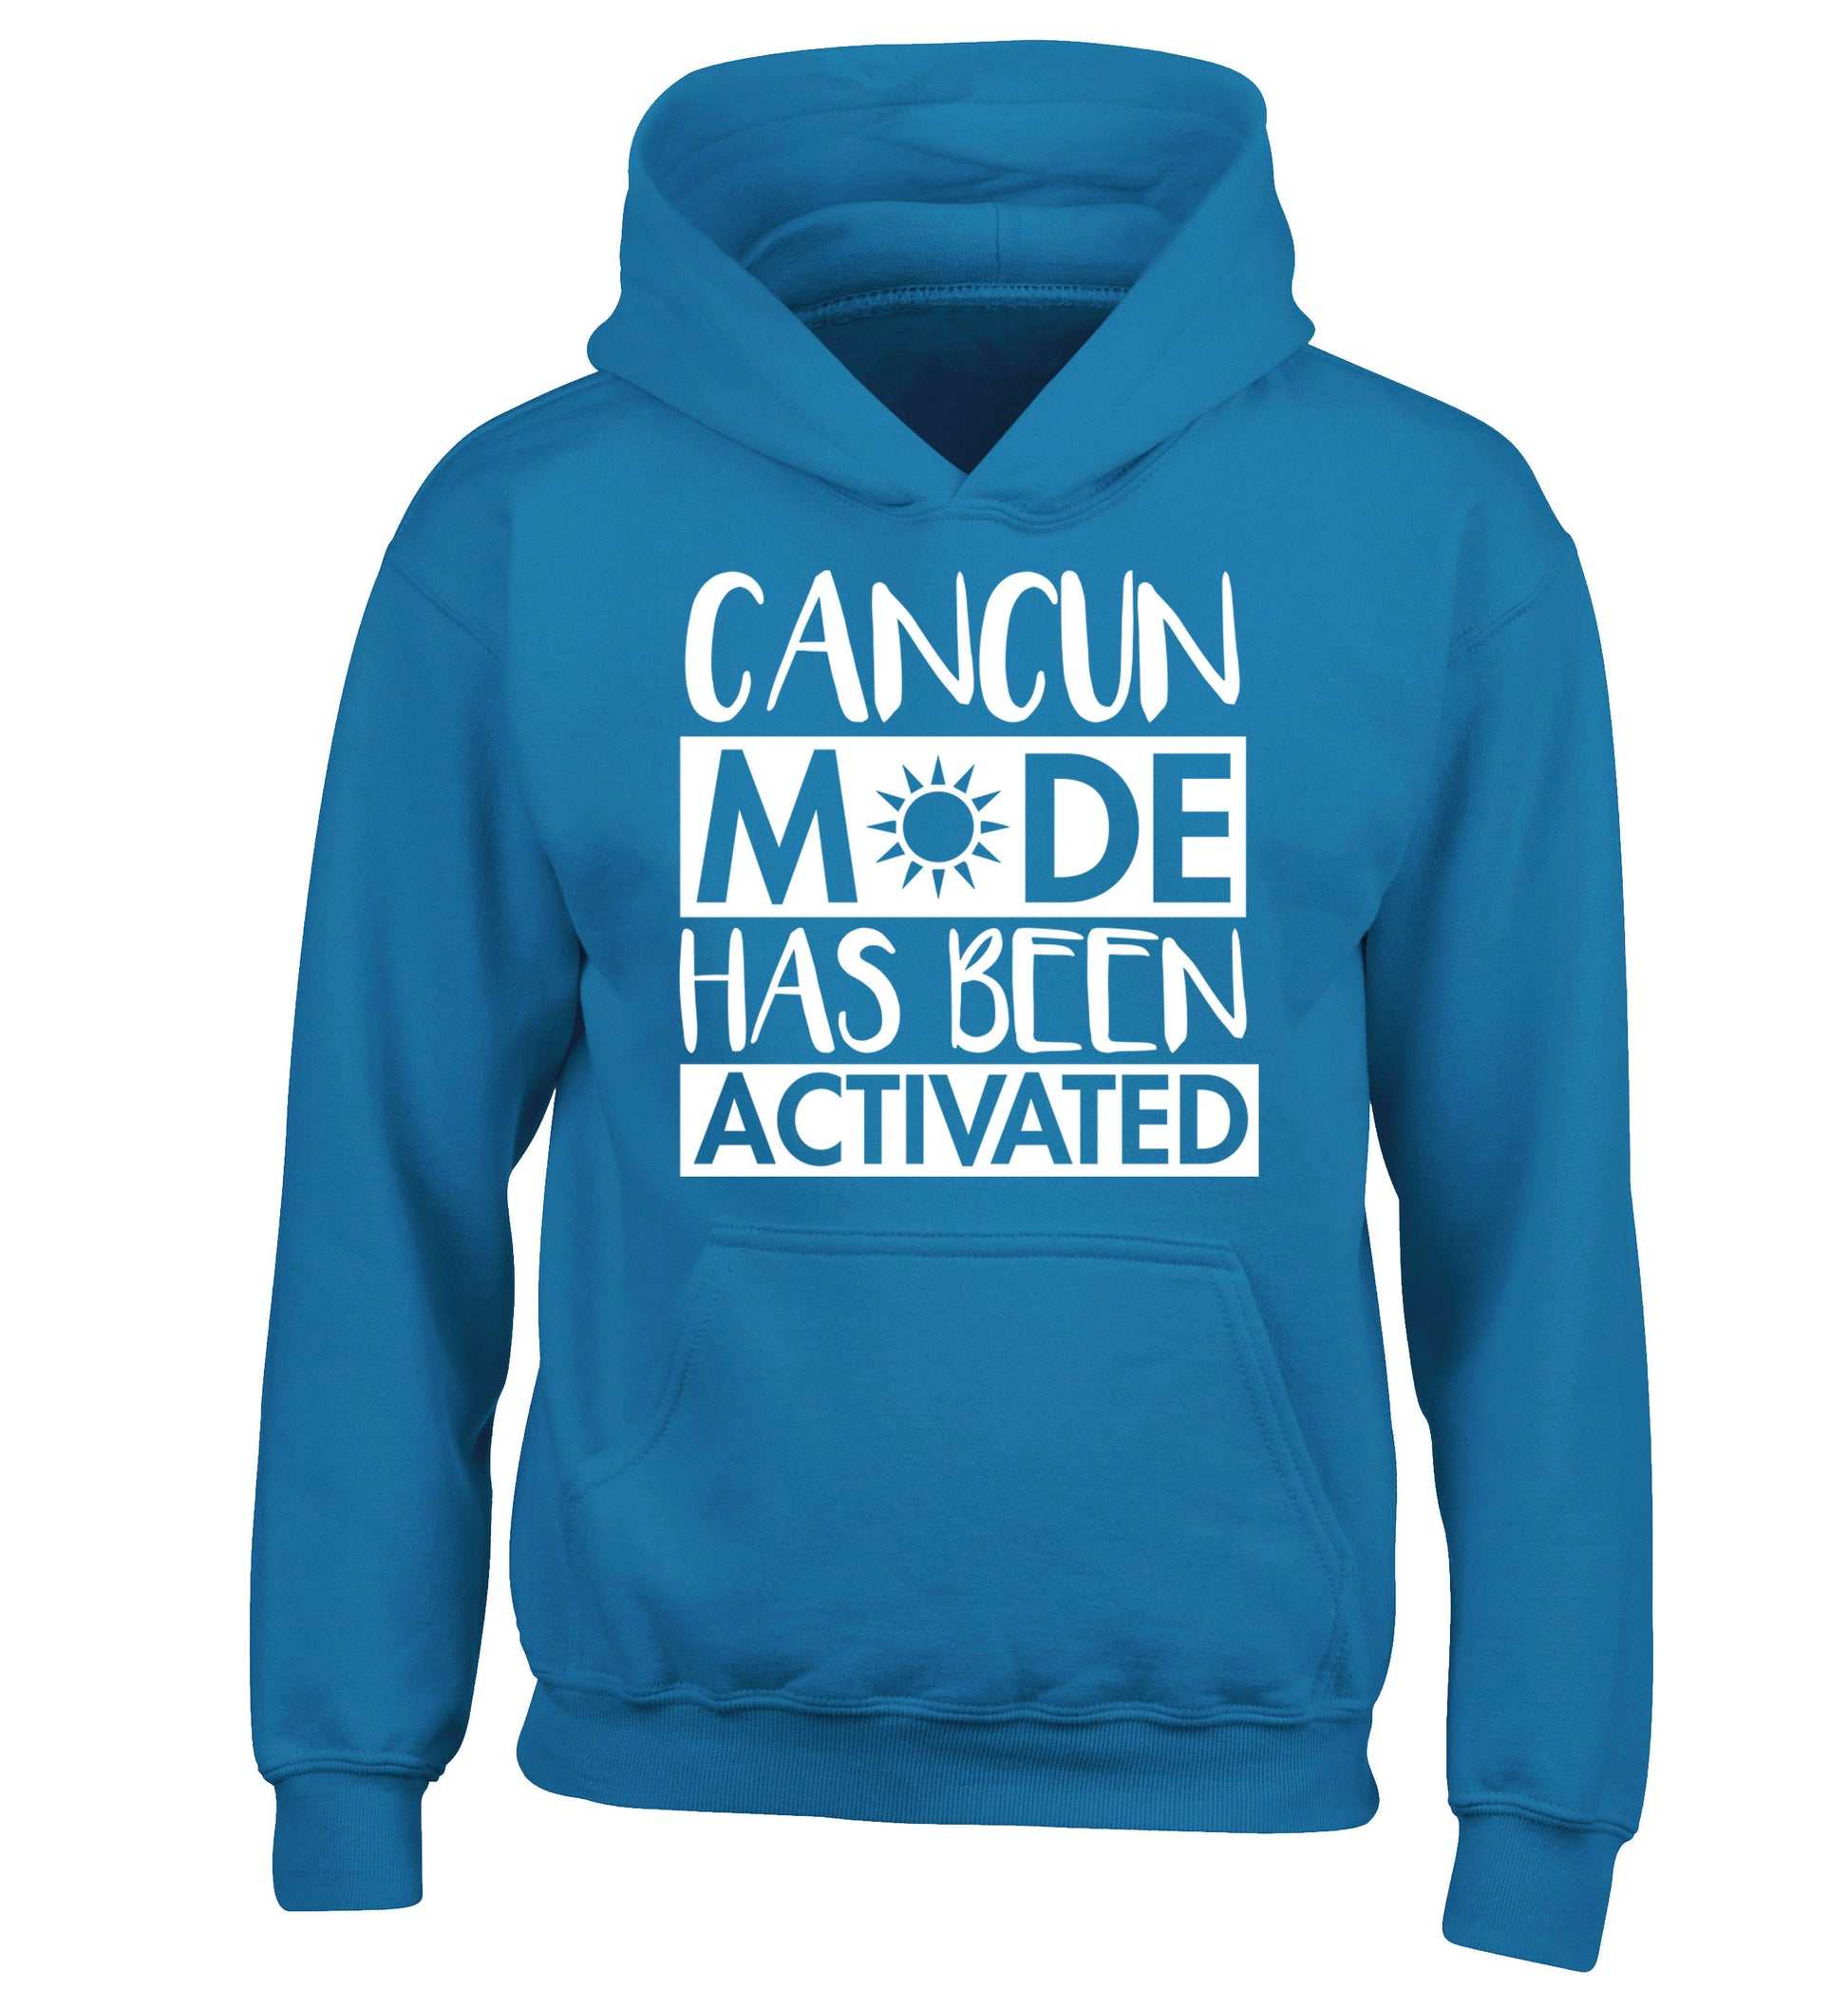 Cancun mode has been activated children's blue hoodie 12-14 Years